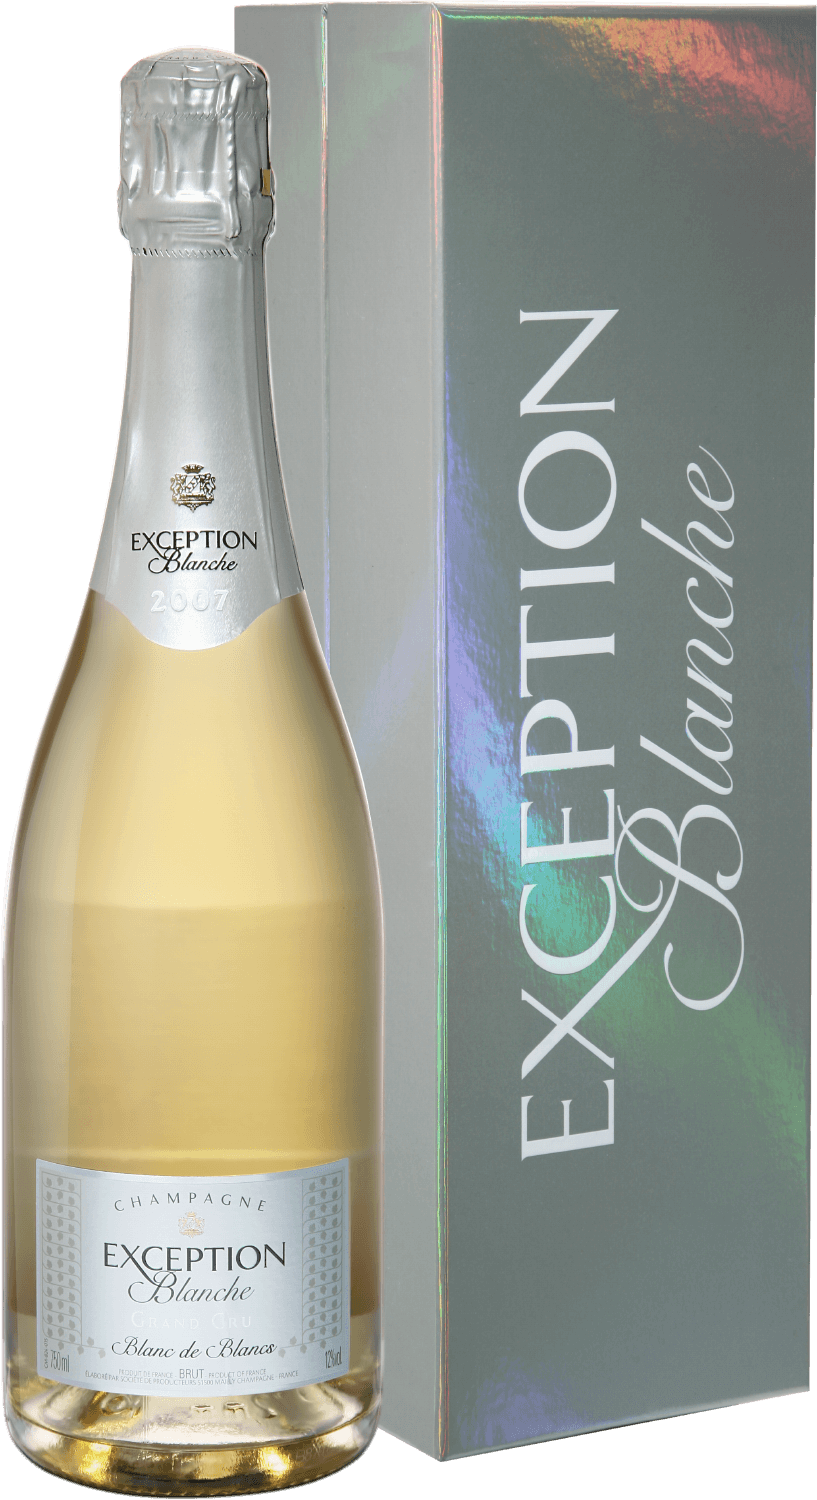 Mailly Grand Cru Exception Blanche Blanc De Blancs Millesime Champagne AOC (gift box) carte blanche champagne aoc louis roederer gift box